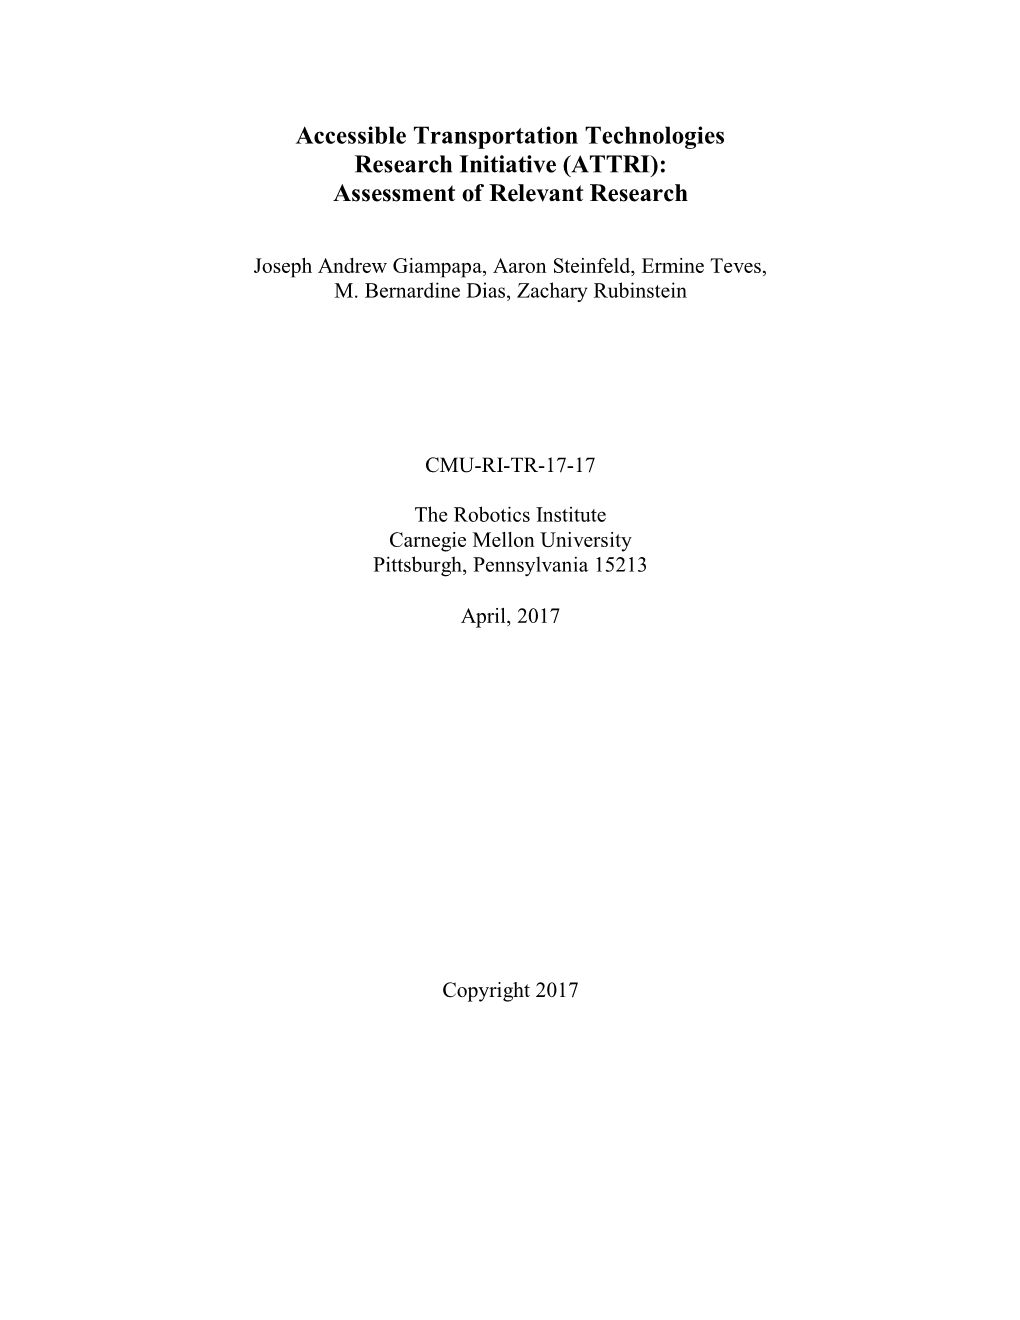 (ATTRI): Assessment of Relevant Research